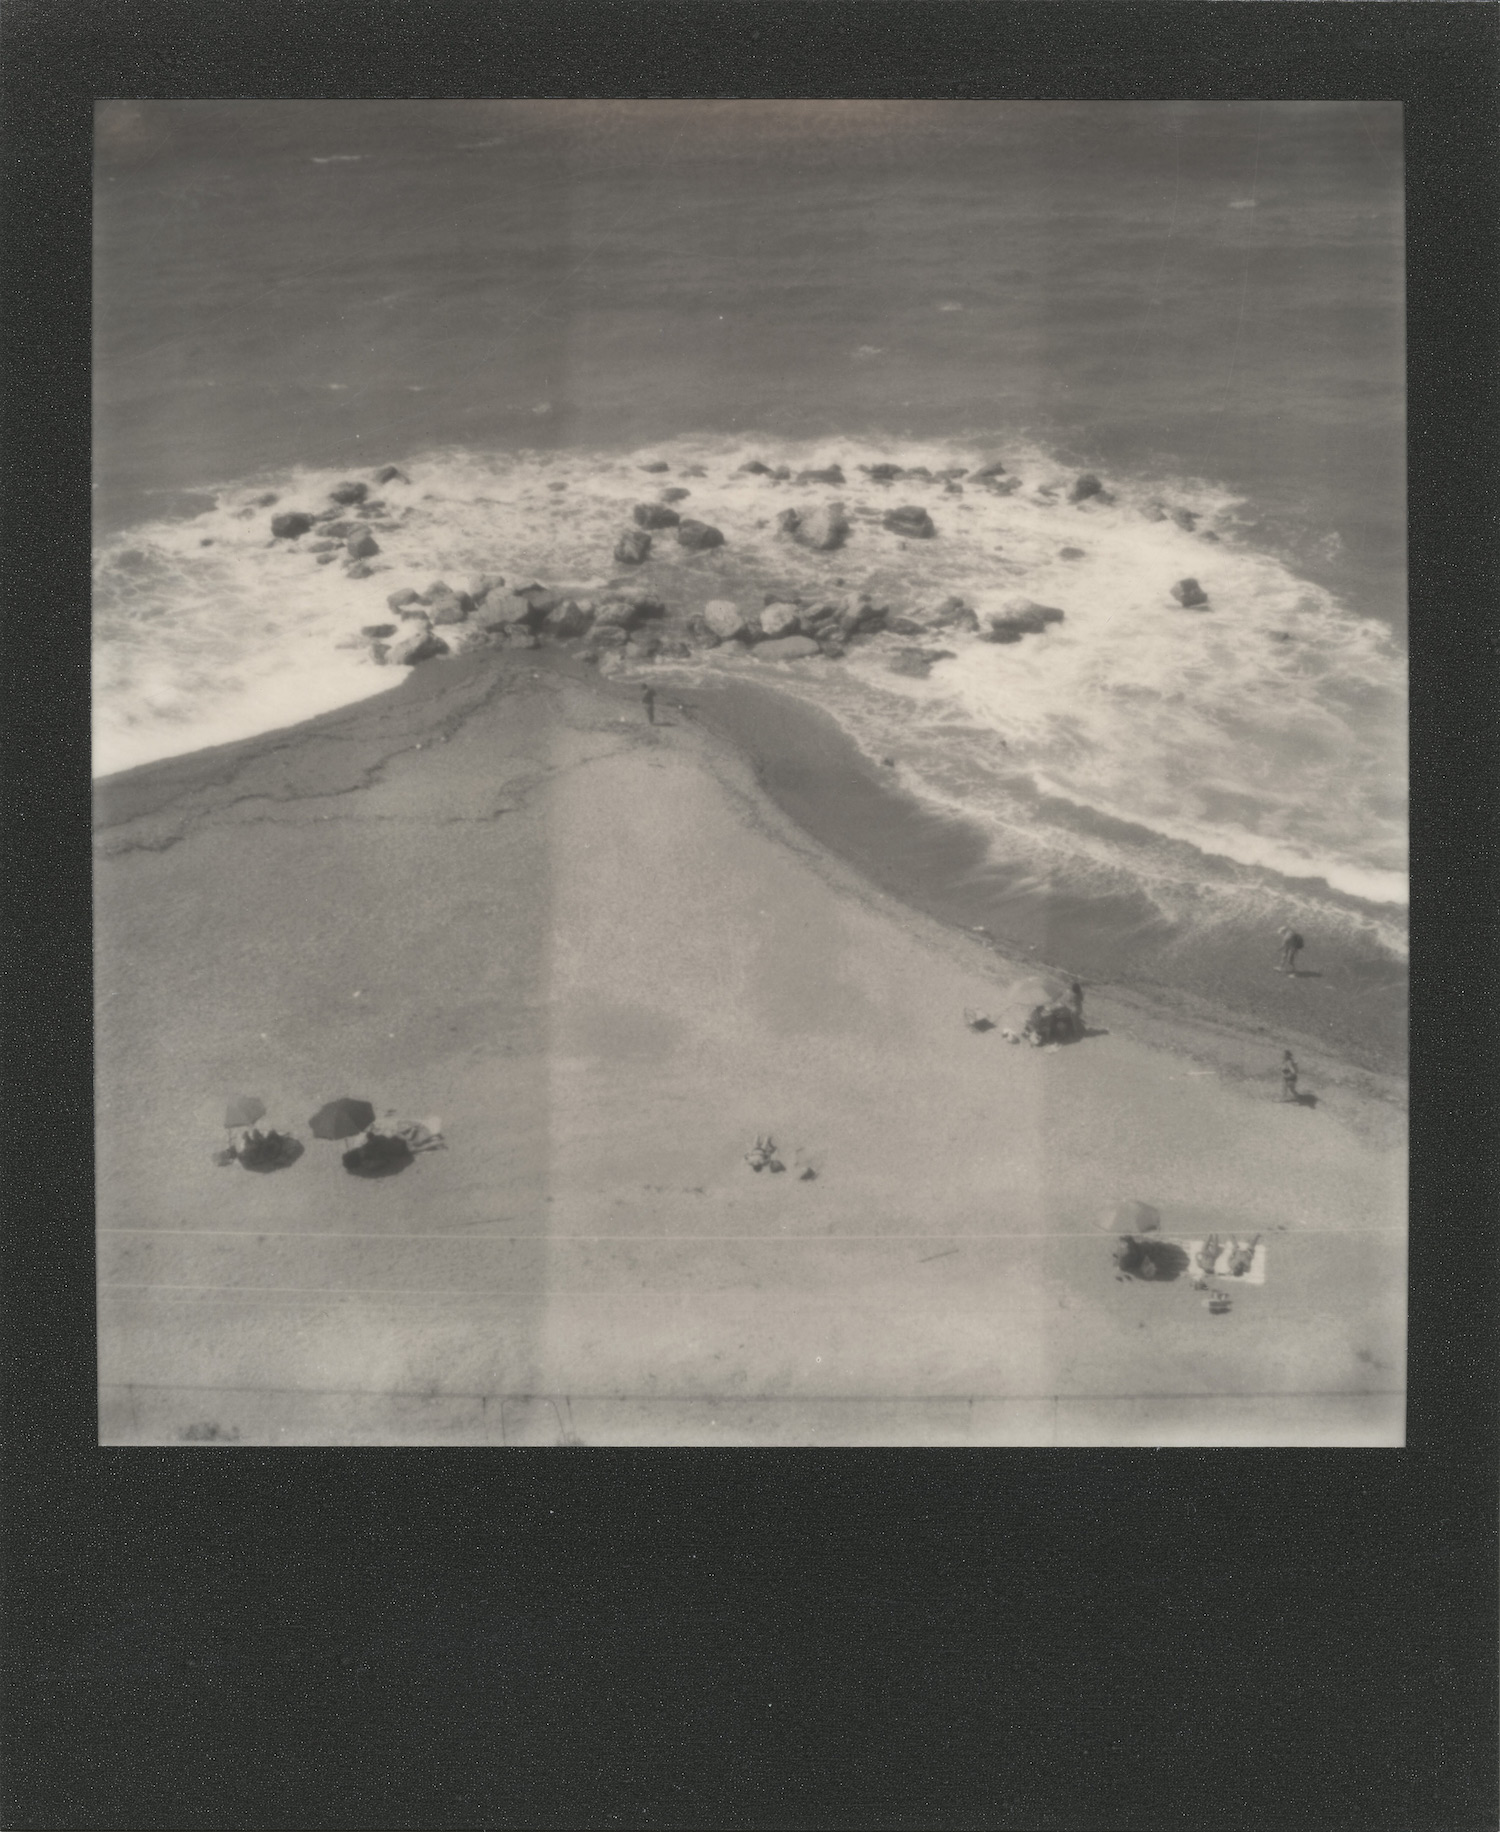 The Bathers Down There | Polaroid SLR680 | Impossible Project 600 B/W | Ale Di Gangi